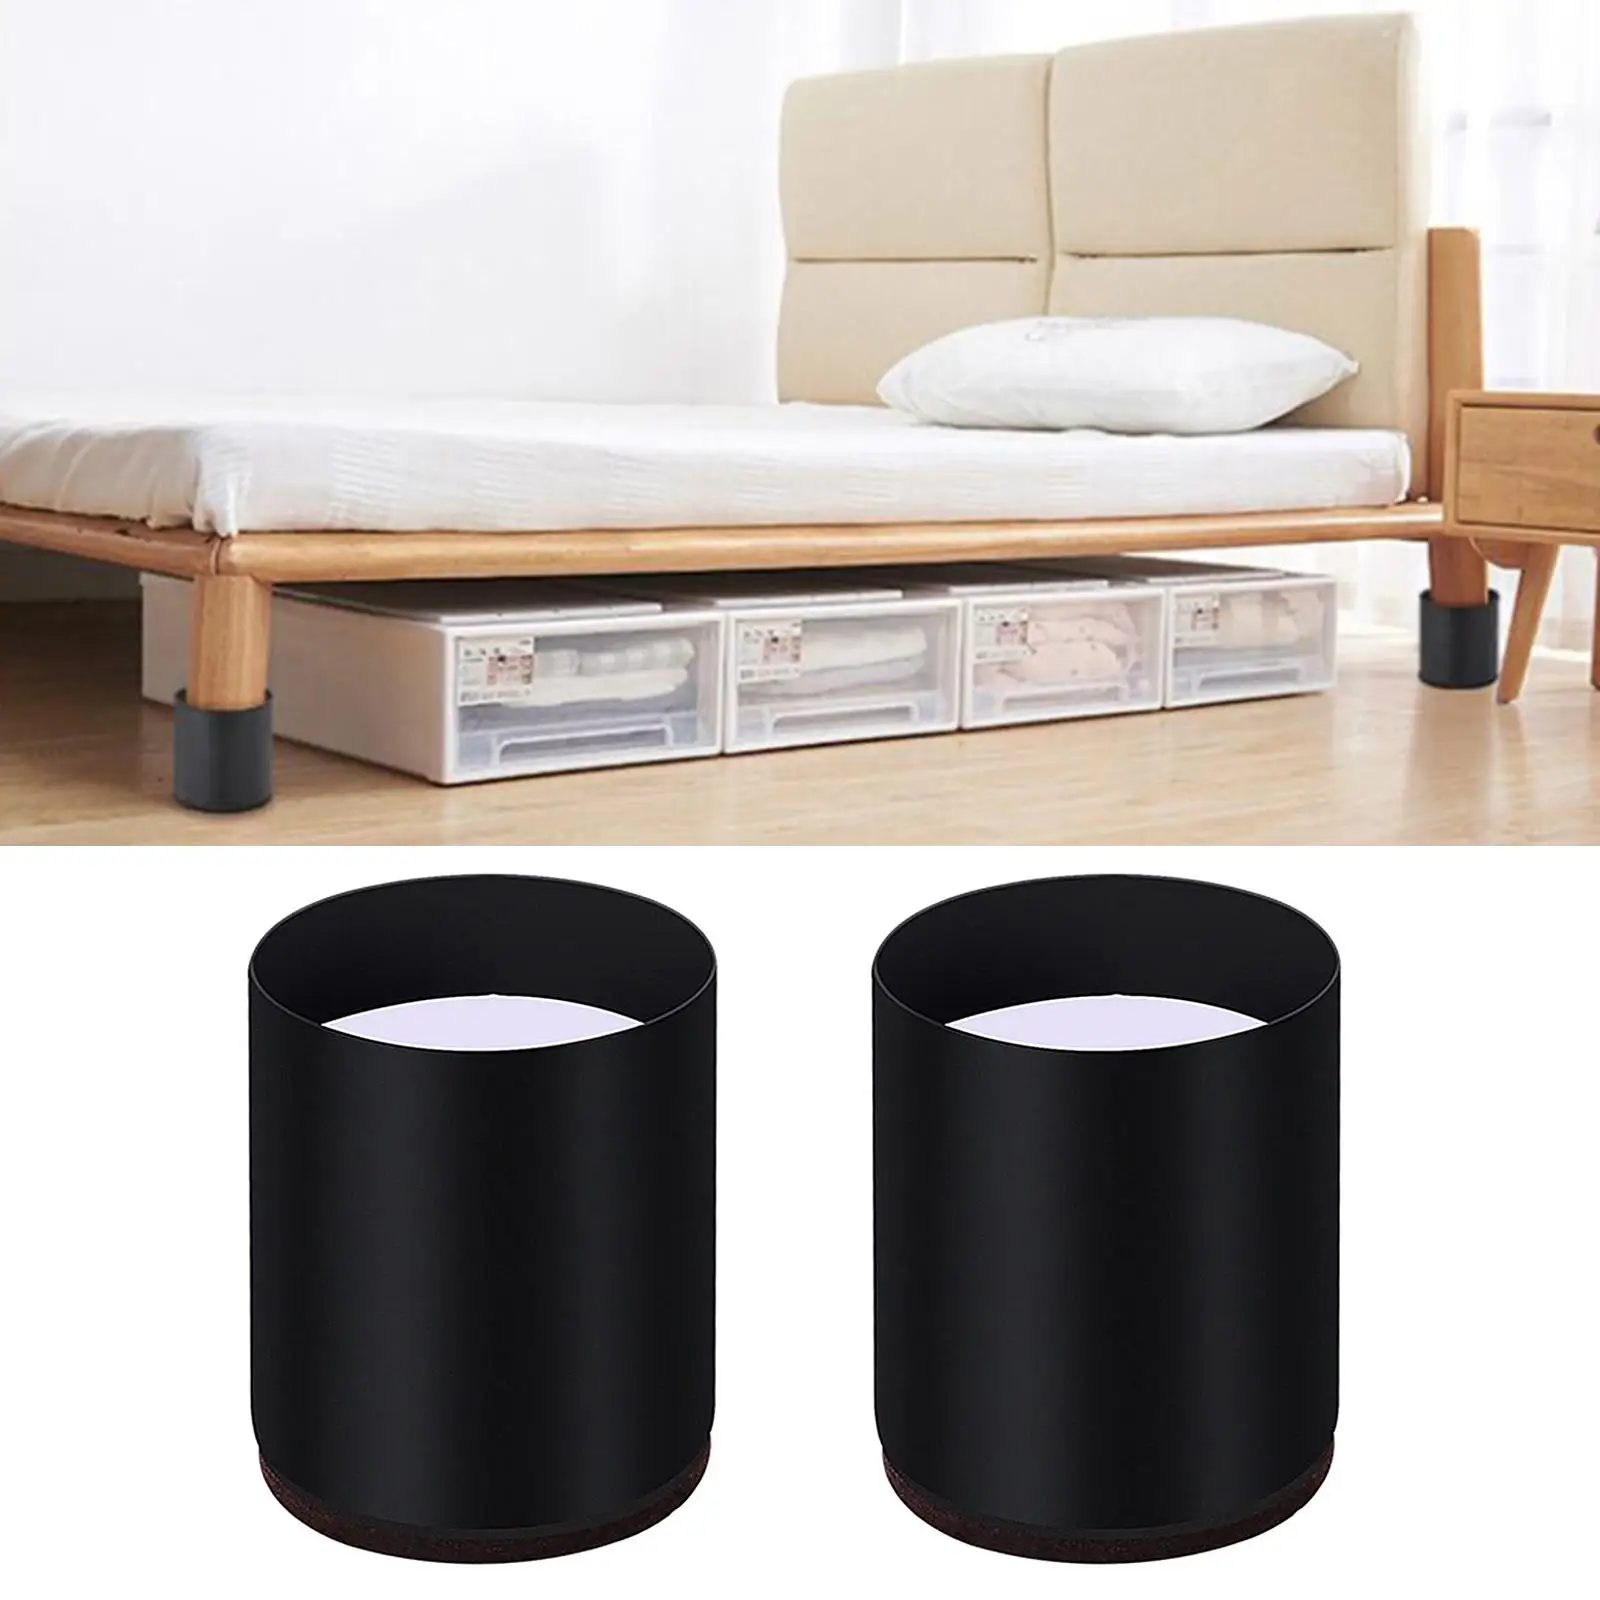 Bed and Furniture Risers Chair Riser Lifter Sofa Legs Riser Home Foot Accessories for Beds, Sofa, Table